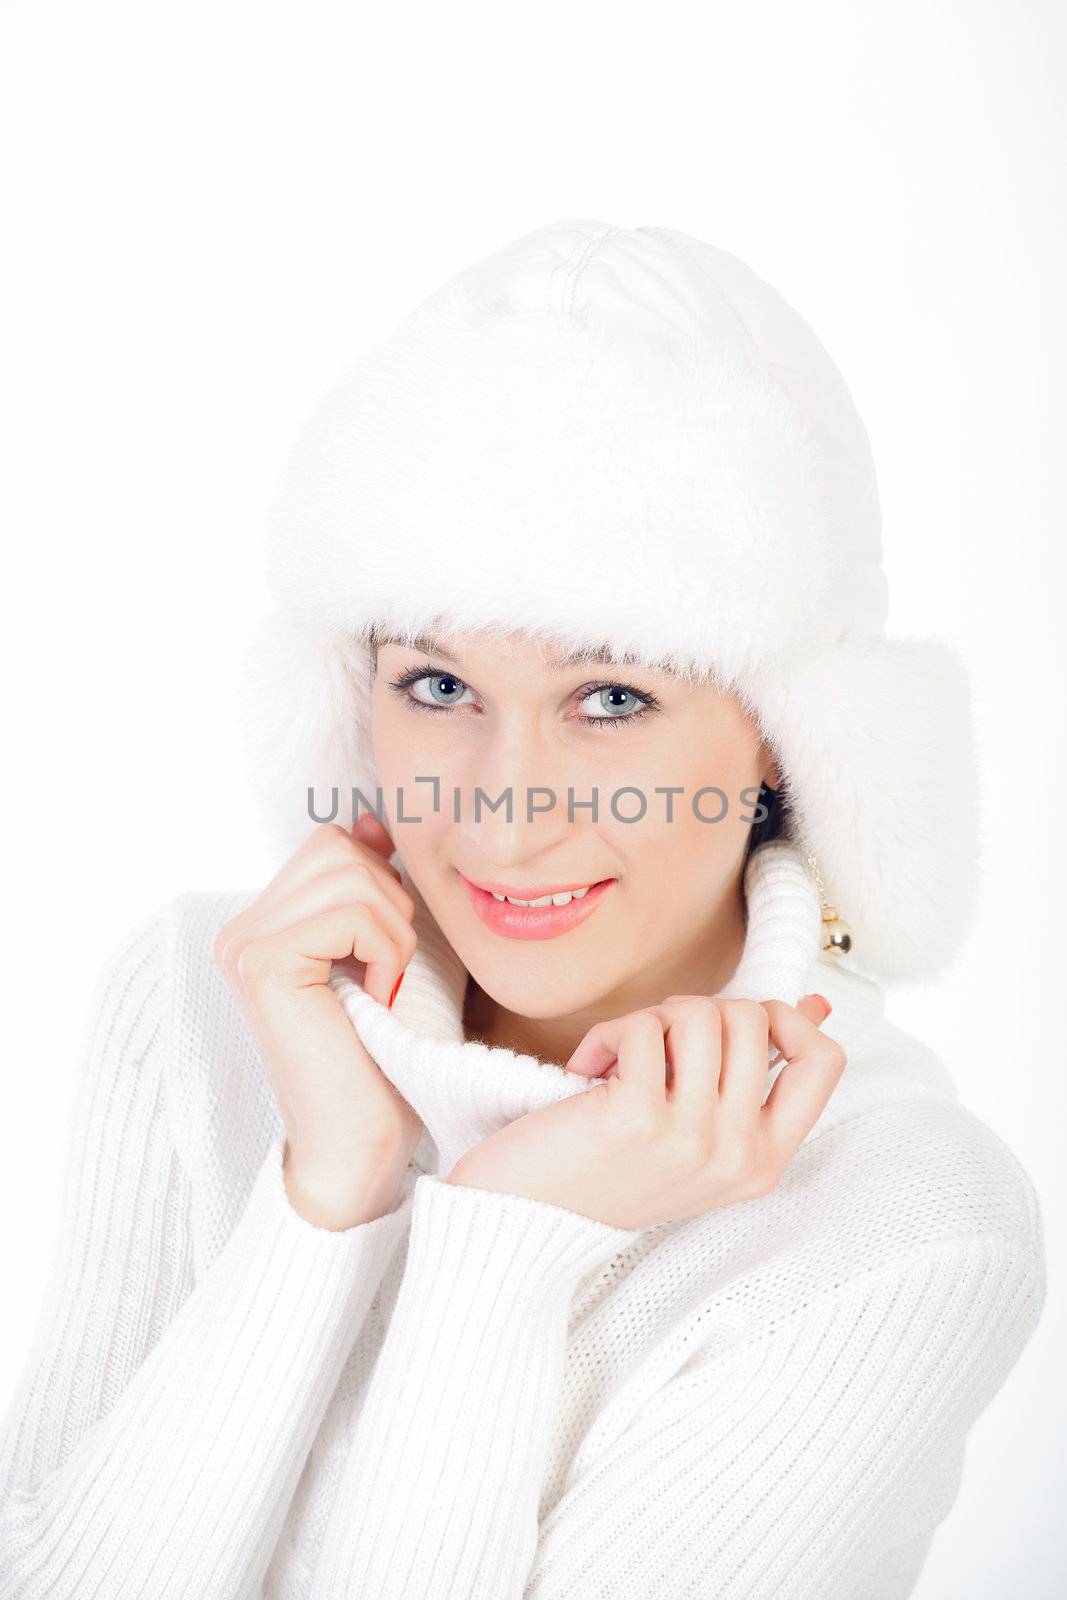 Smiling young girl posing in a winter cap and knit sweater. Studio portrait on white background